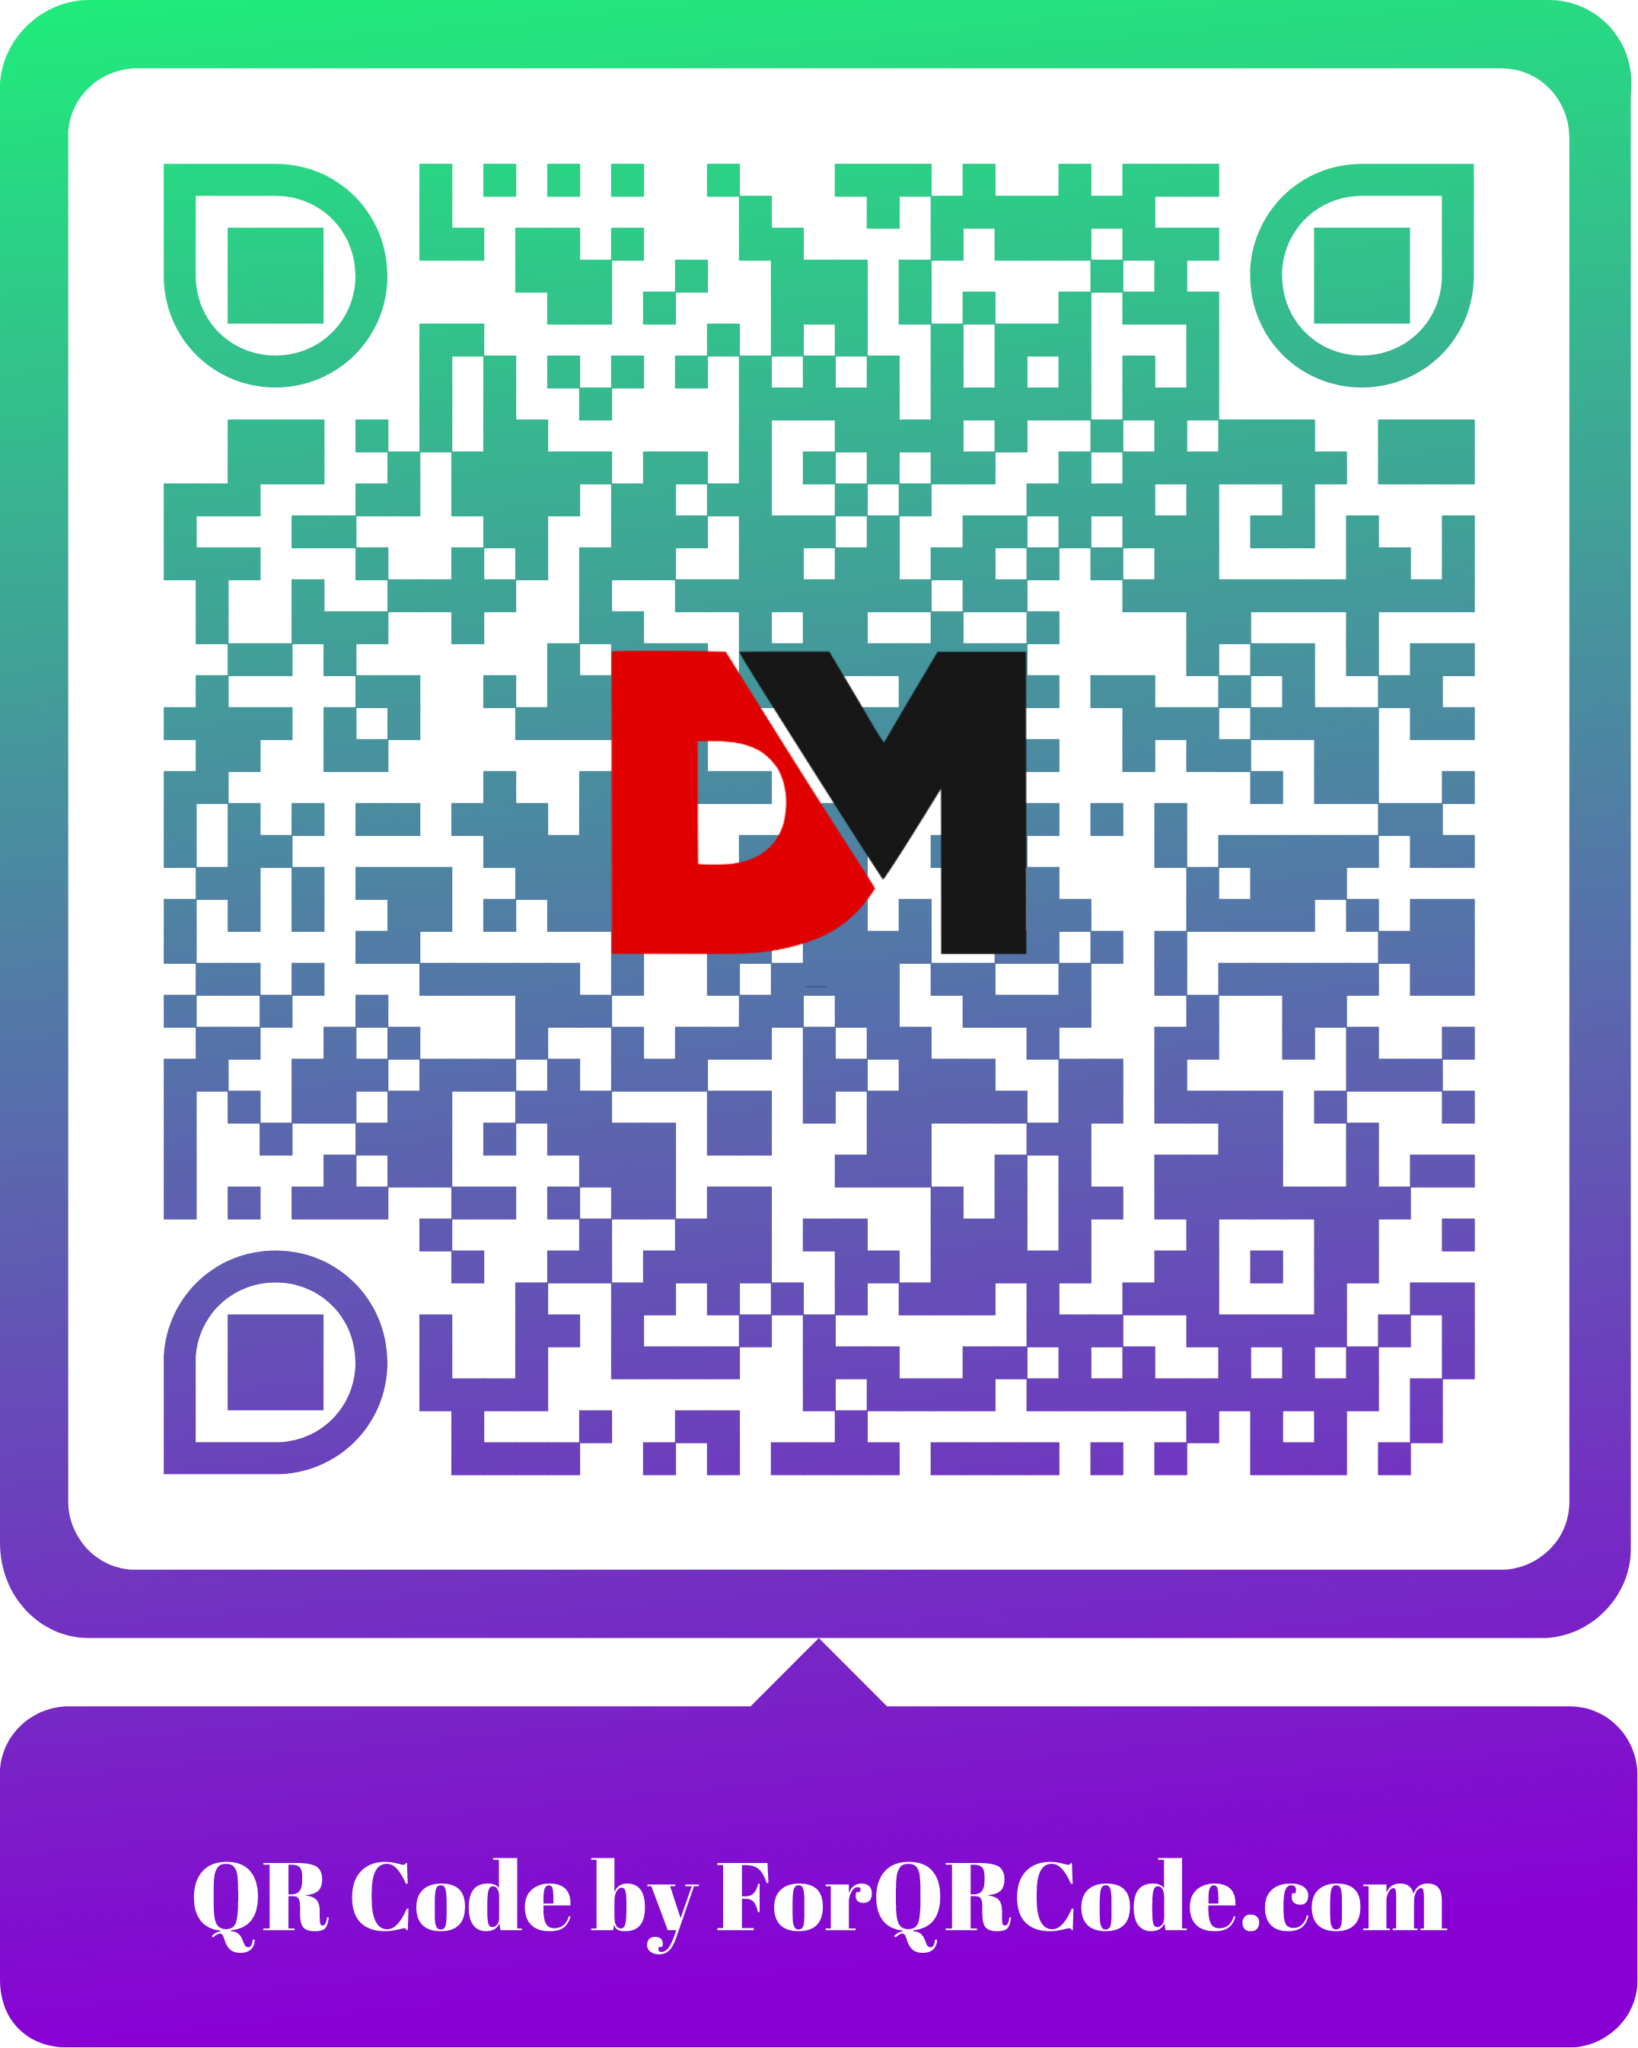 best free qr code reader app for android with no ads